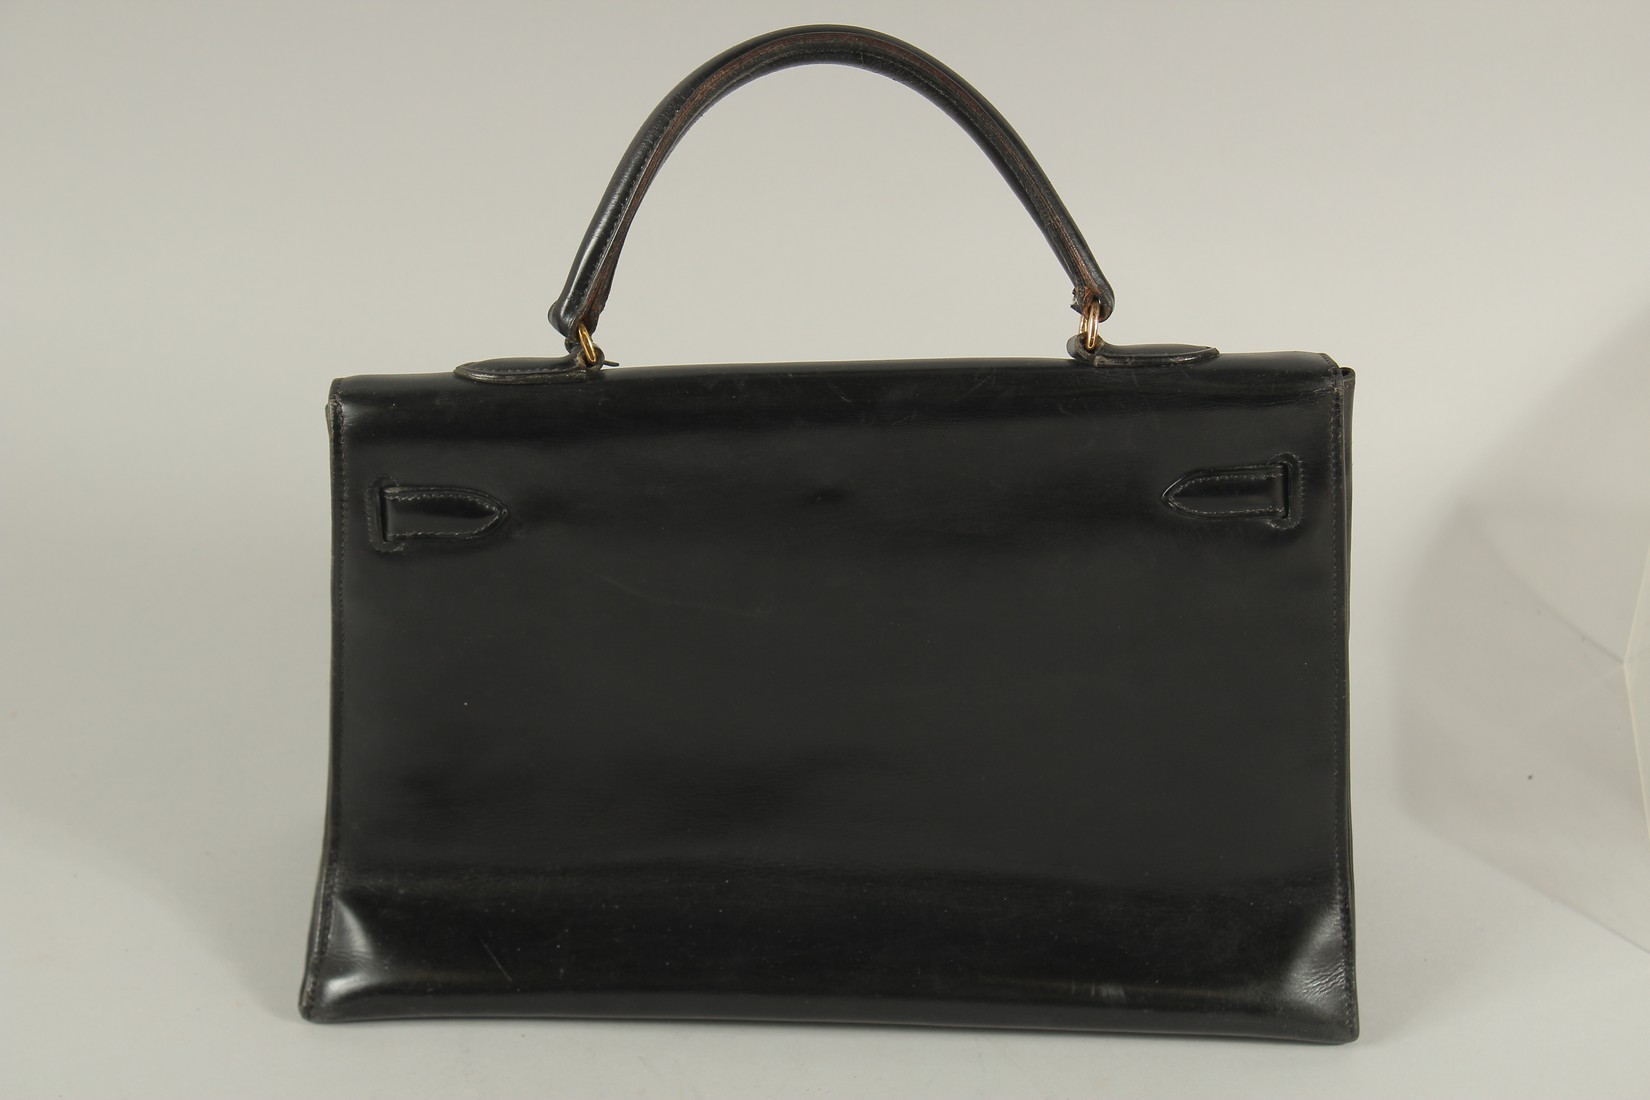 A VERY GOOD VINTAGE HERMES BLACK LEATHER BAG, 1963. 36cms long x 26cms deep x 13cms wide, with a - Image 6 of 7